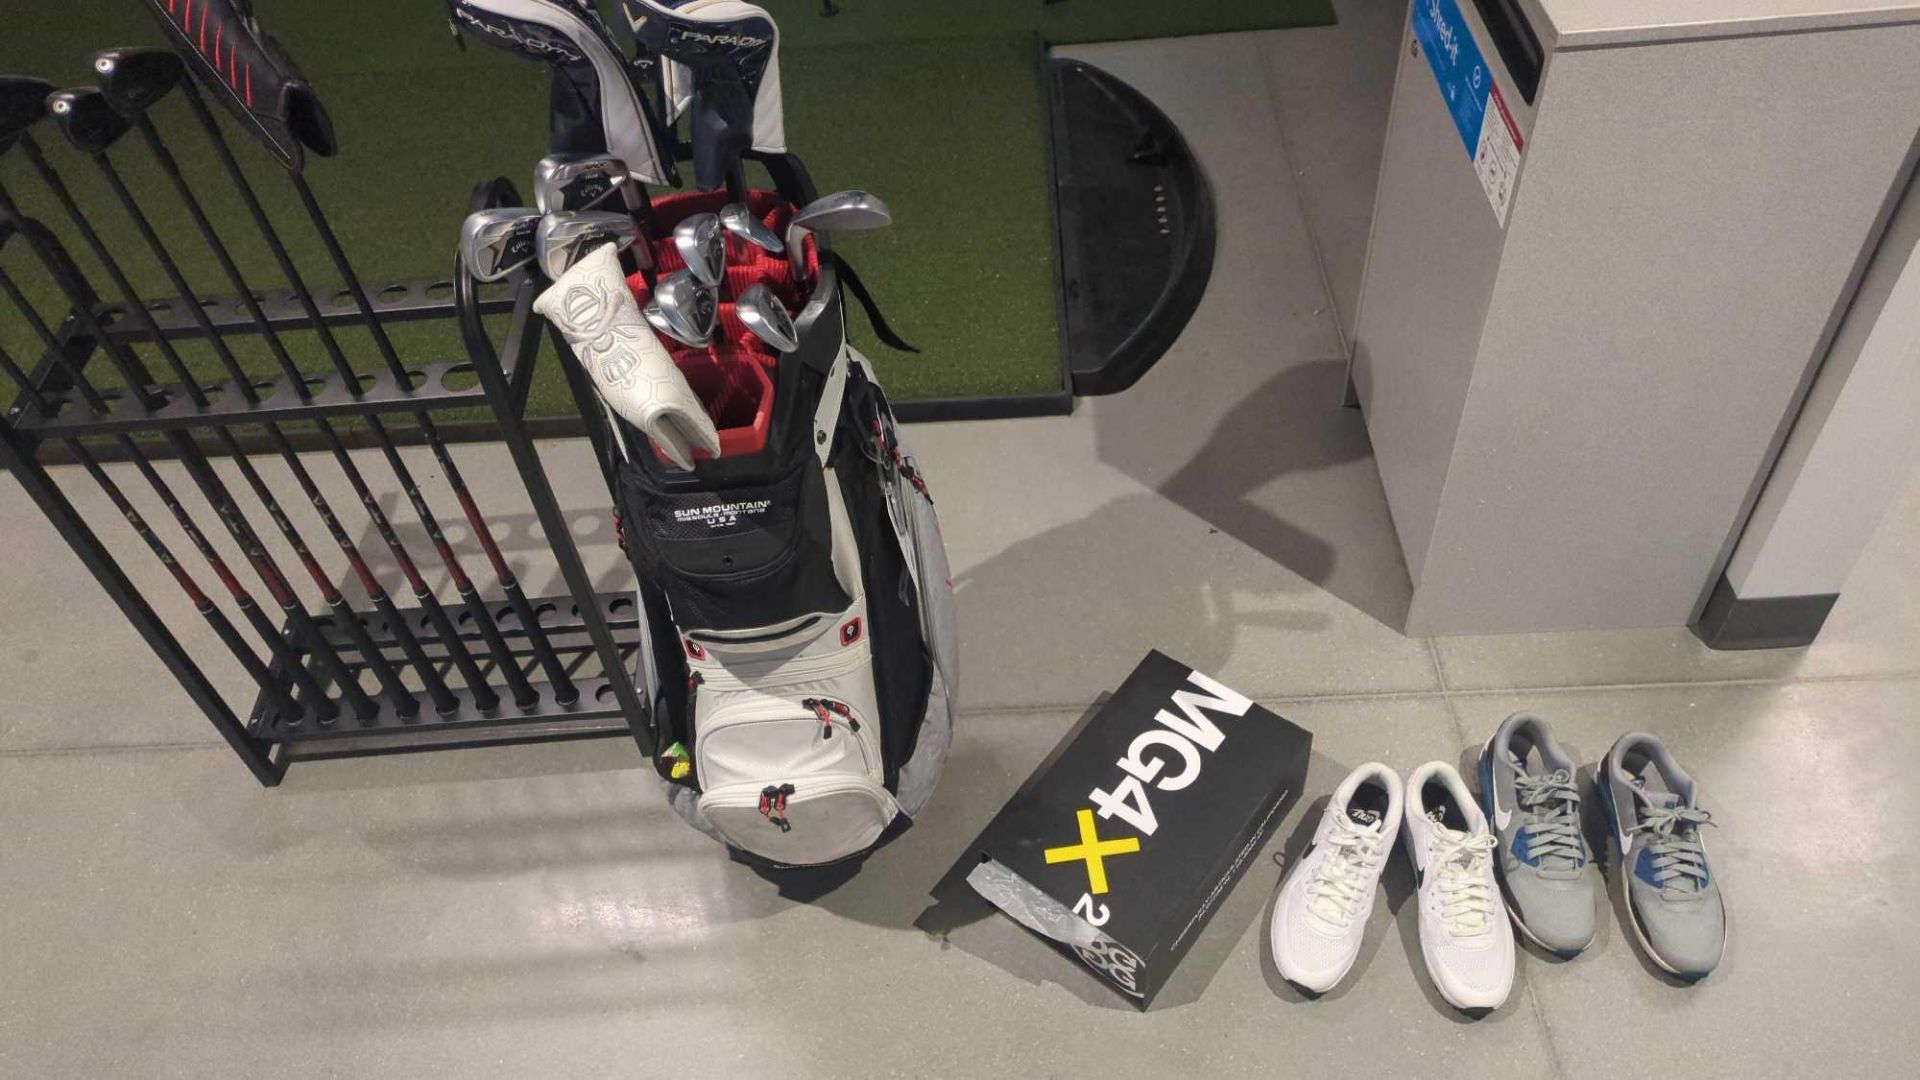 Golf clubs, golf bags, and shoes